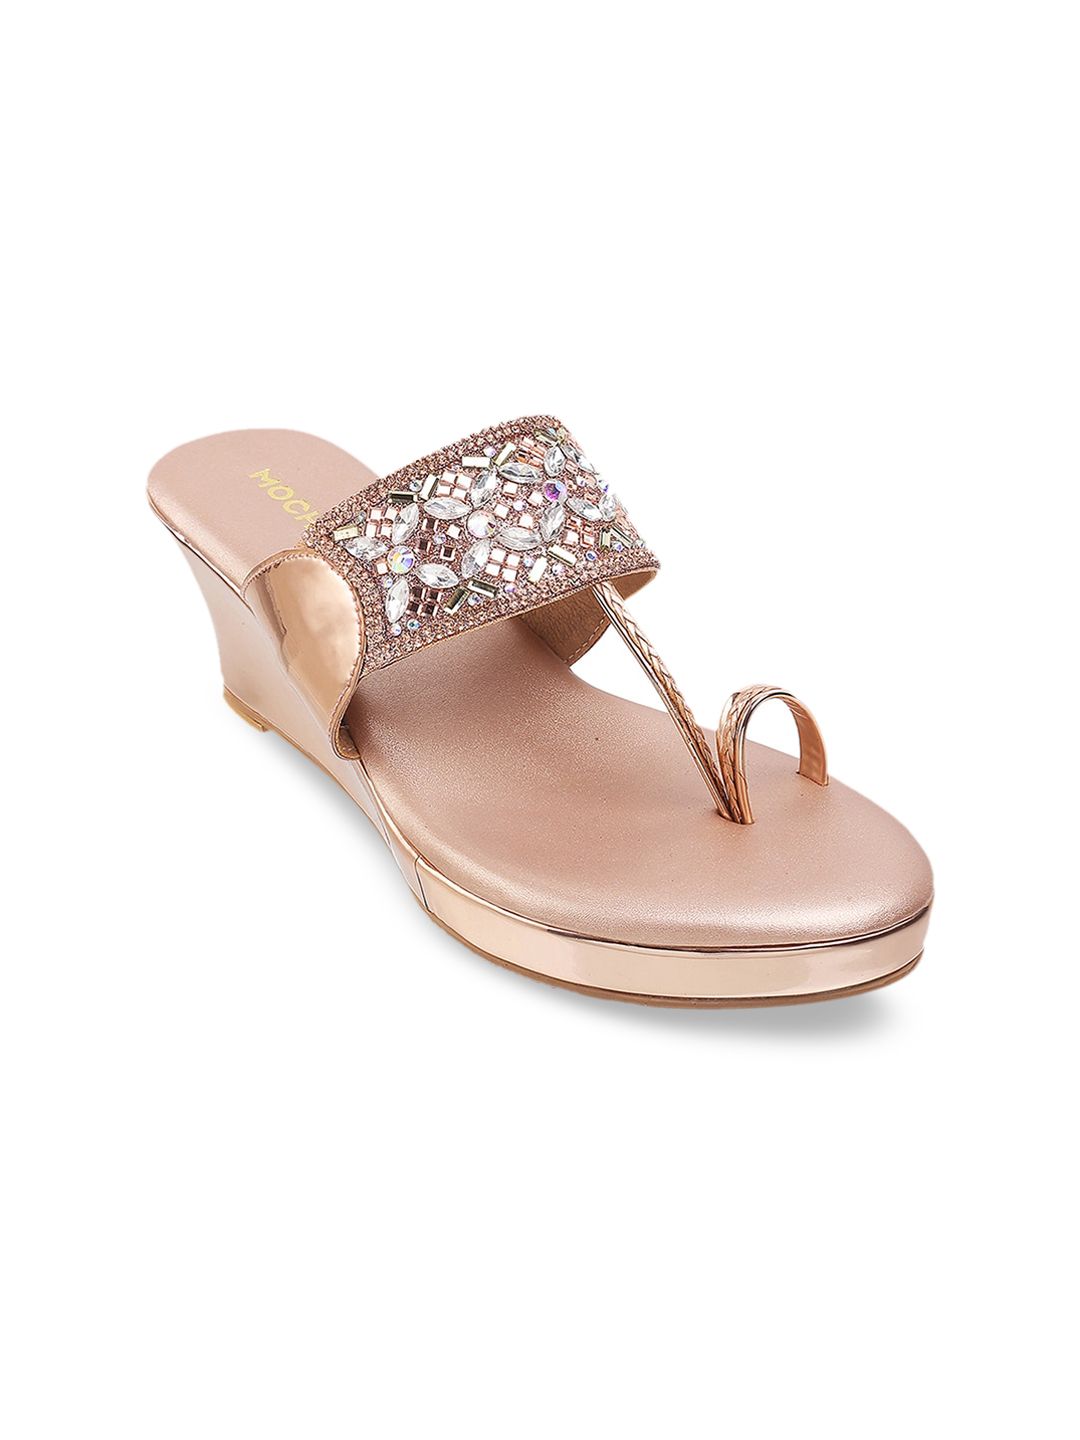 Mochi Rose Gold-Toned Embellished Open Toe Wedge Sandals Price in India